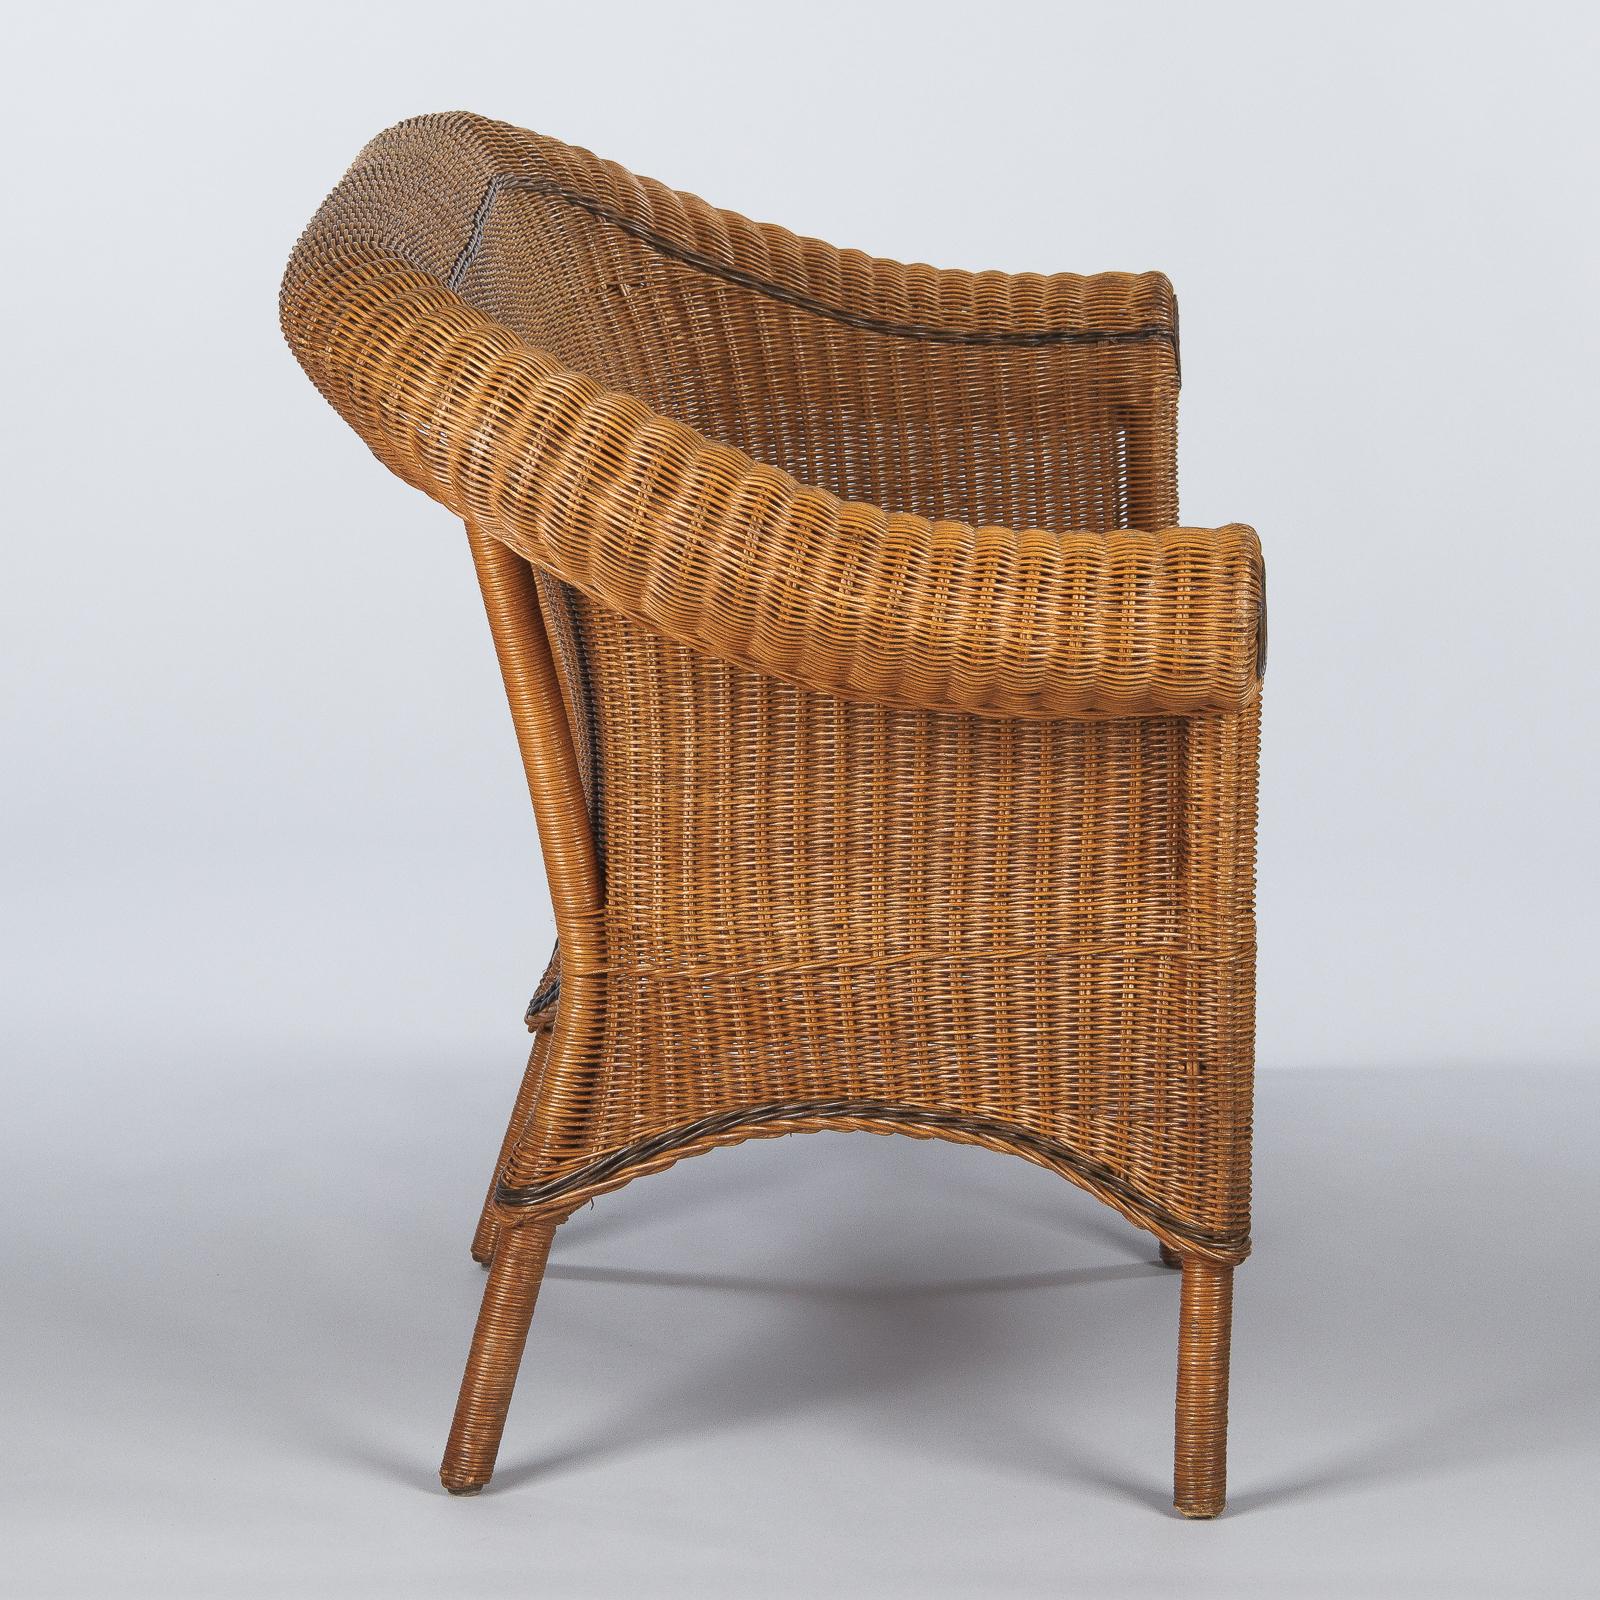 20th Century French Vintage Wicker and Pine Sofa, 1930s